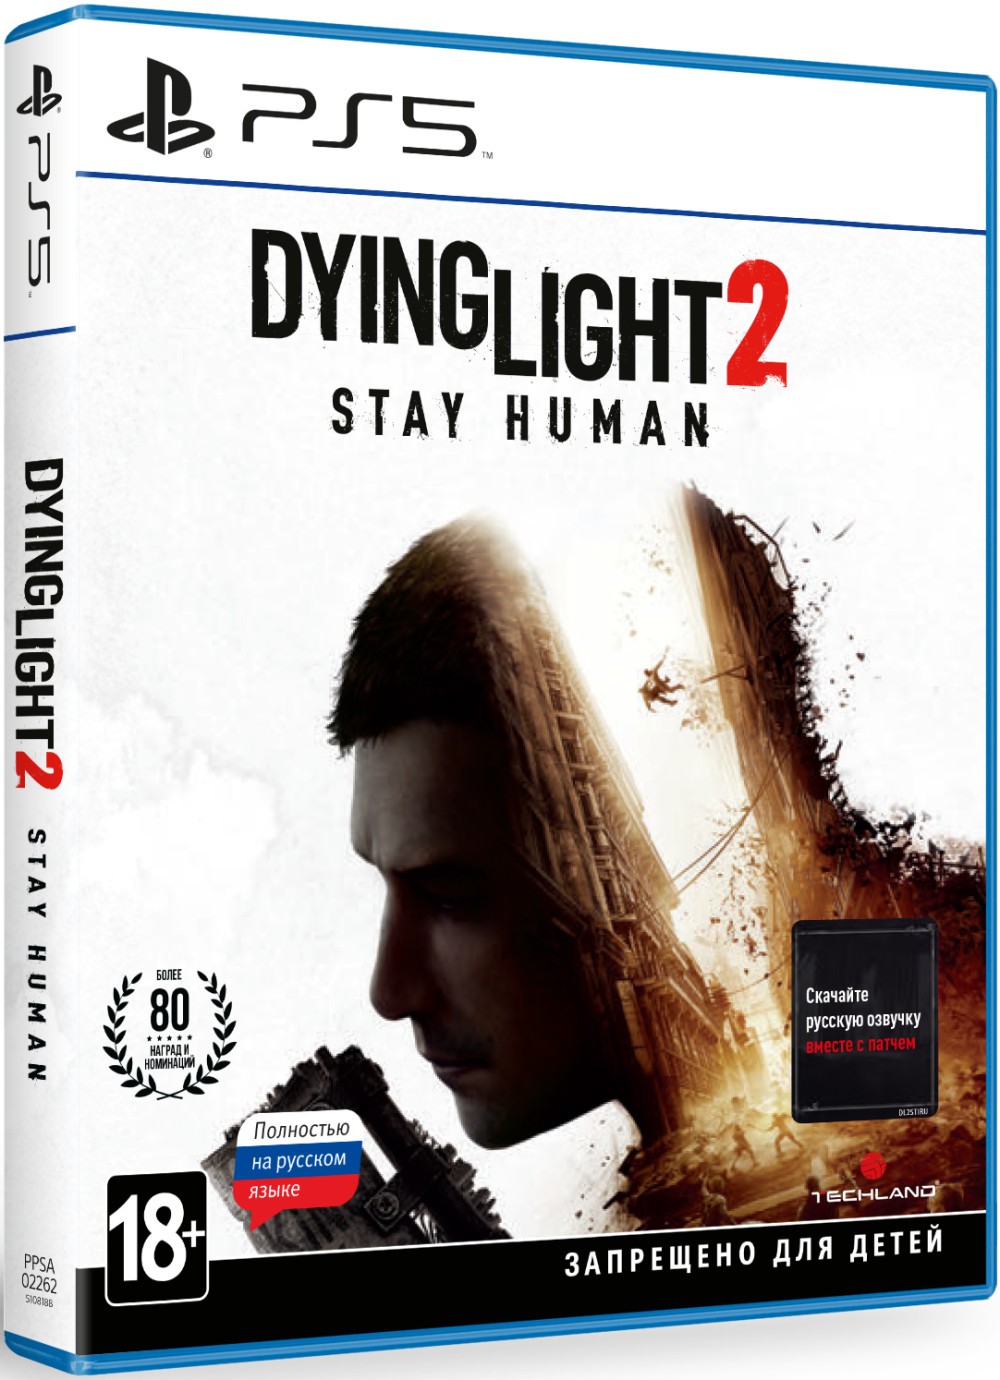  Dying Light 2 Stay Human [PS5,  ] +   Red Bull   250